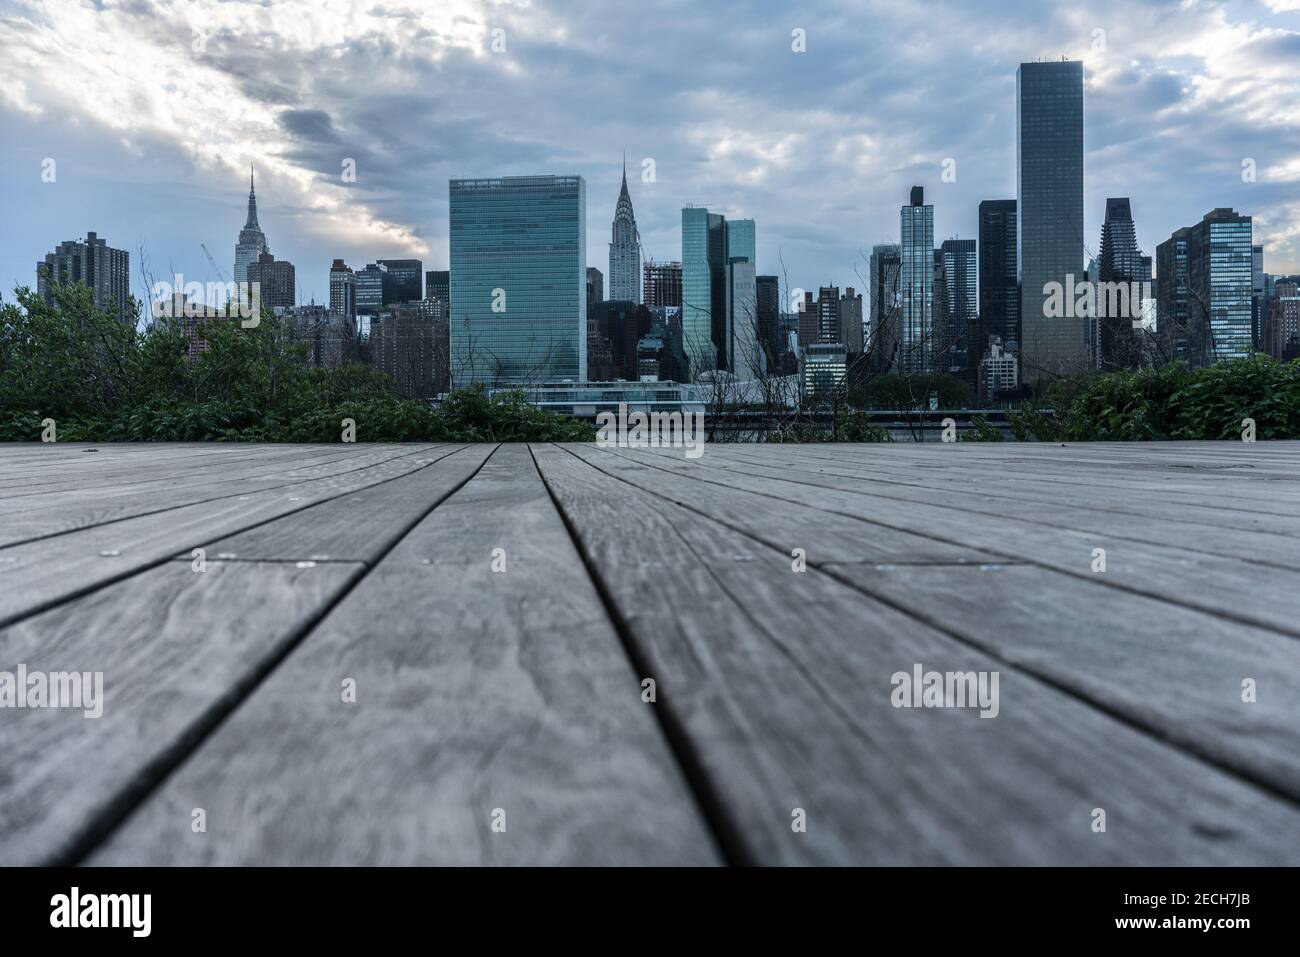 Directly across the East River from the boardwalk in  Long Island City is Midtown Manhattan with the Empire State Building, the Untied Nations, the Ch Stock Photo